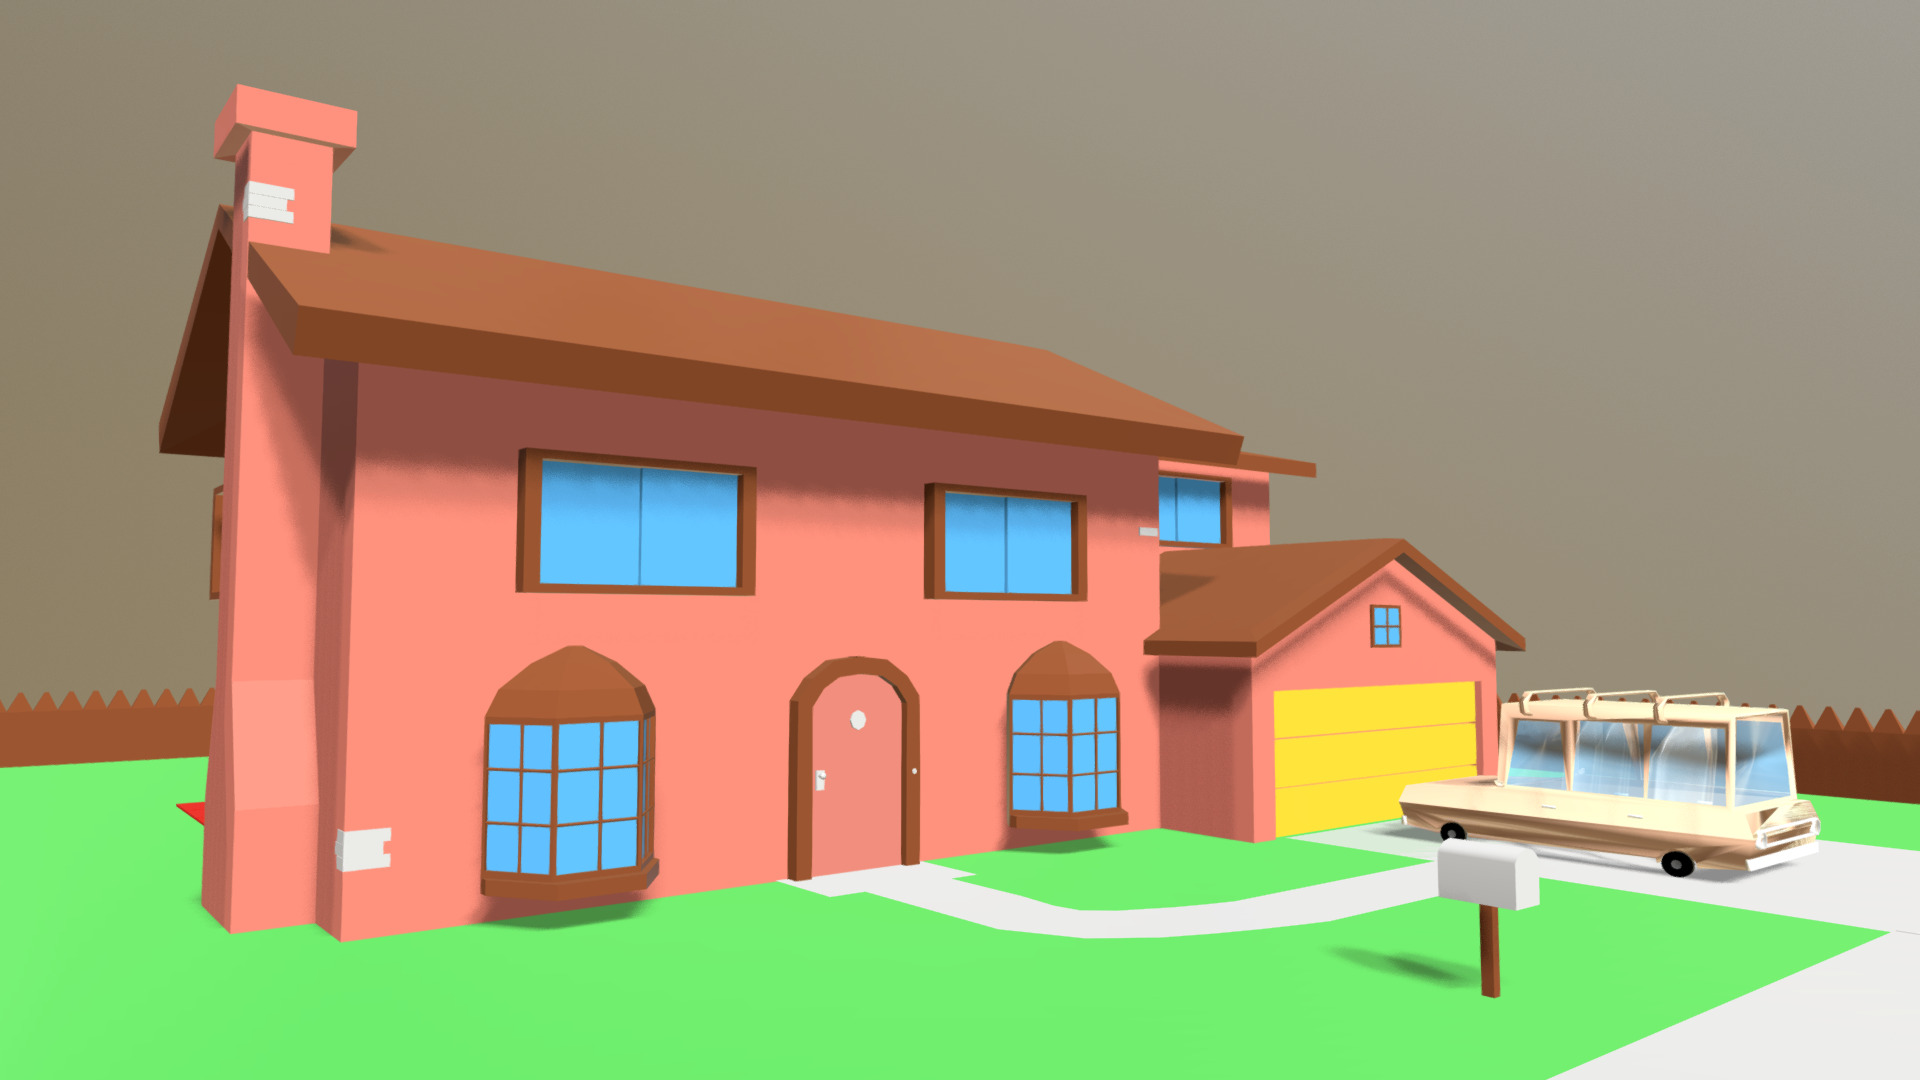 In this work, I did the low poly replica of the house of the Simpsons of the series with the same name. It took me about two and a half days to complete this work 3d model